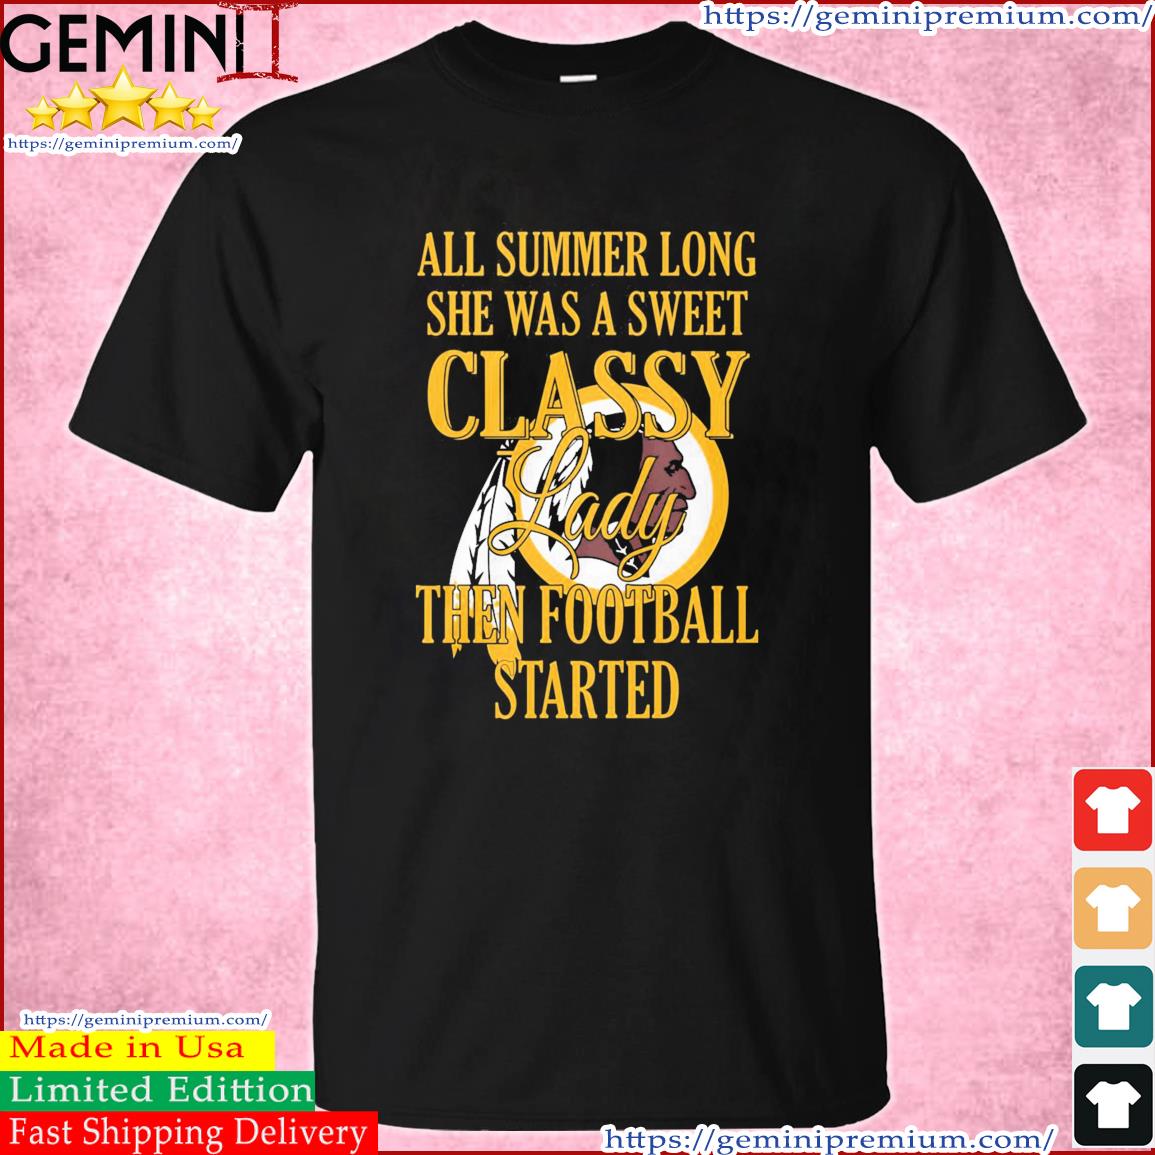 Washington Redskins All Summer Long She A Sweet Classy Lady The Football Started Shirt